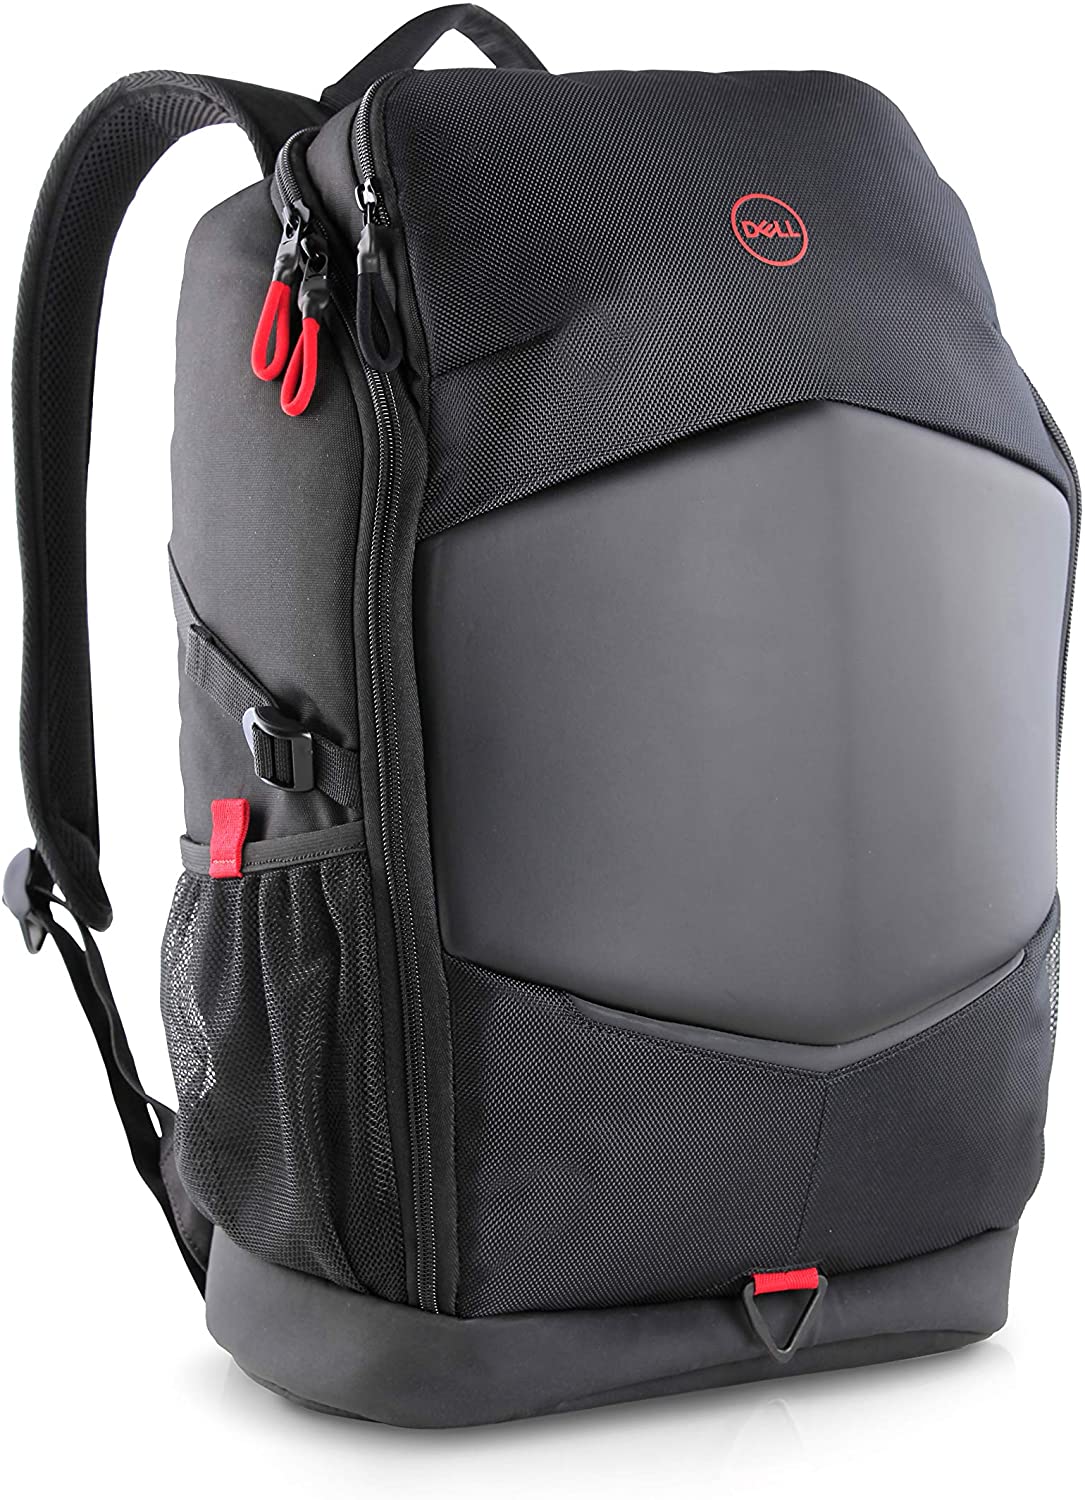 Dell 50KD6 Gaming Backpack 15